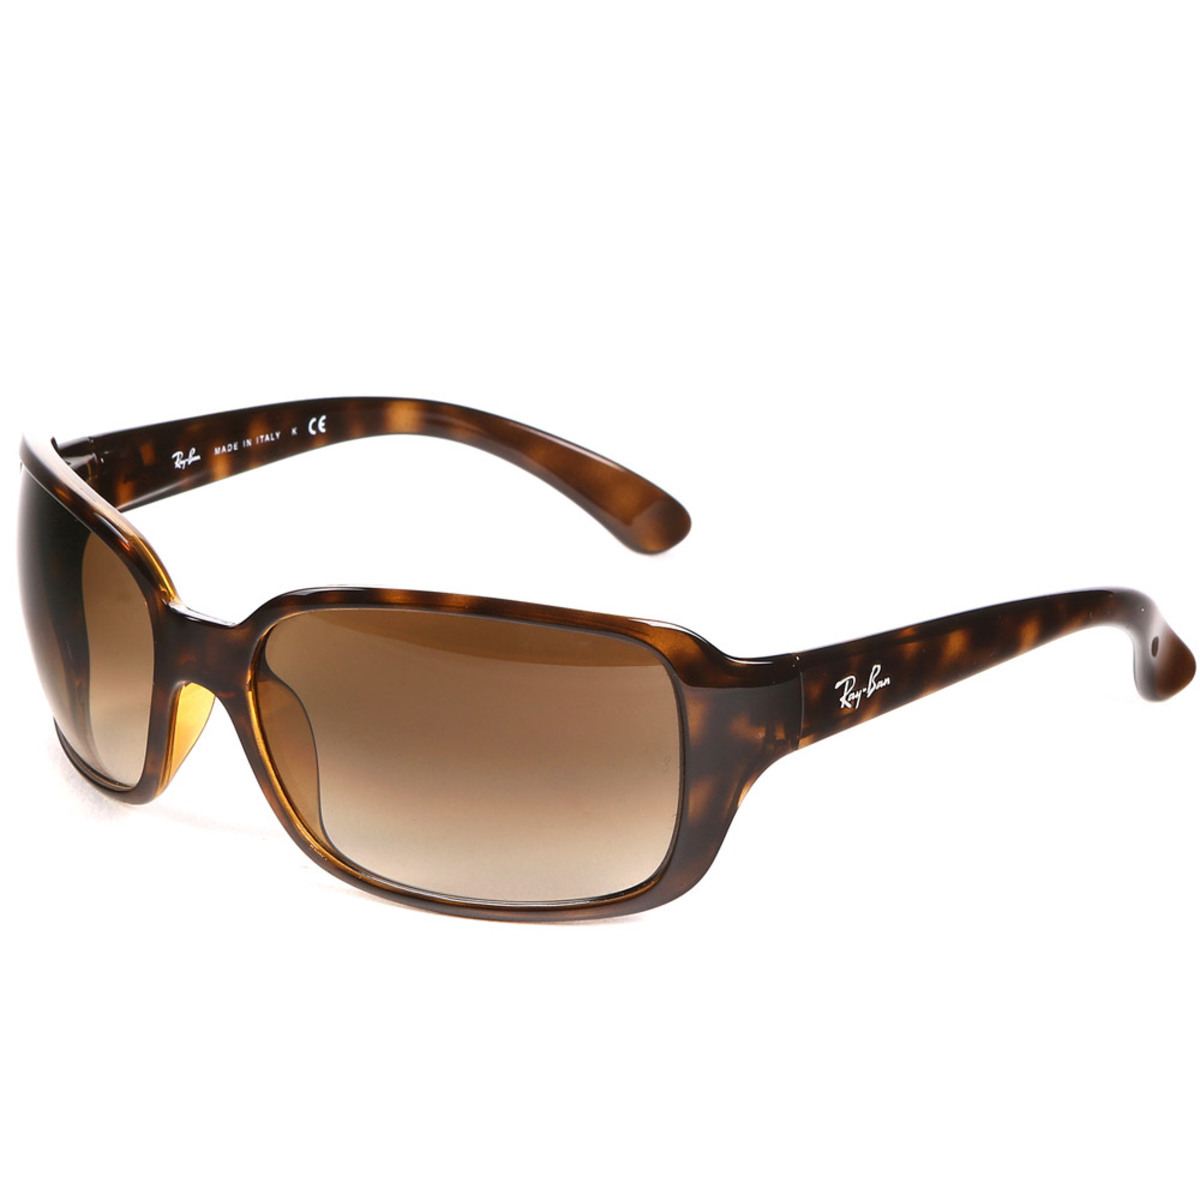 Ray-Ban Tortoise Shell Sunglasses with Brown Lenses, RB40...